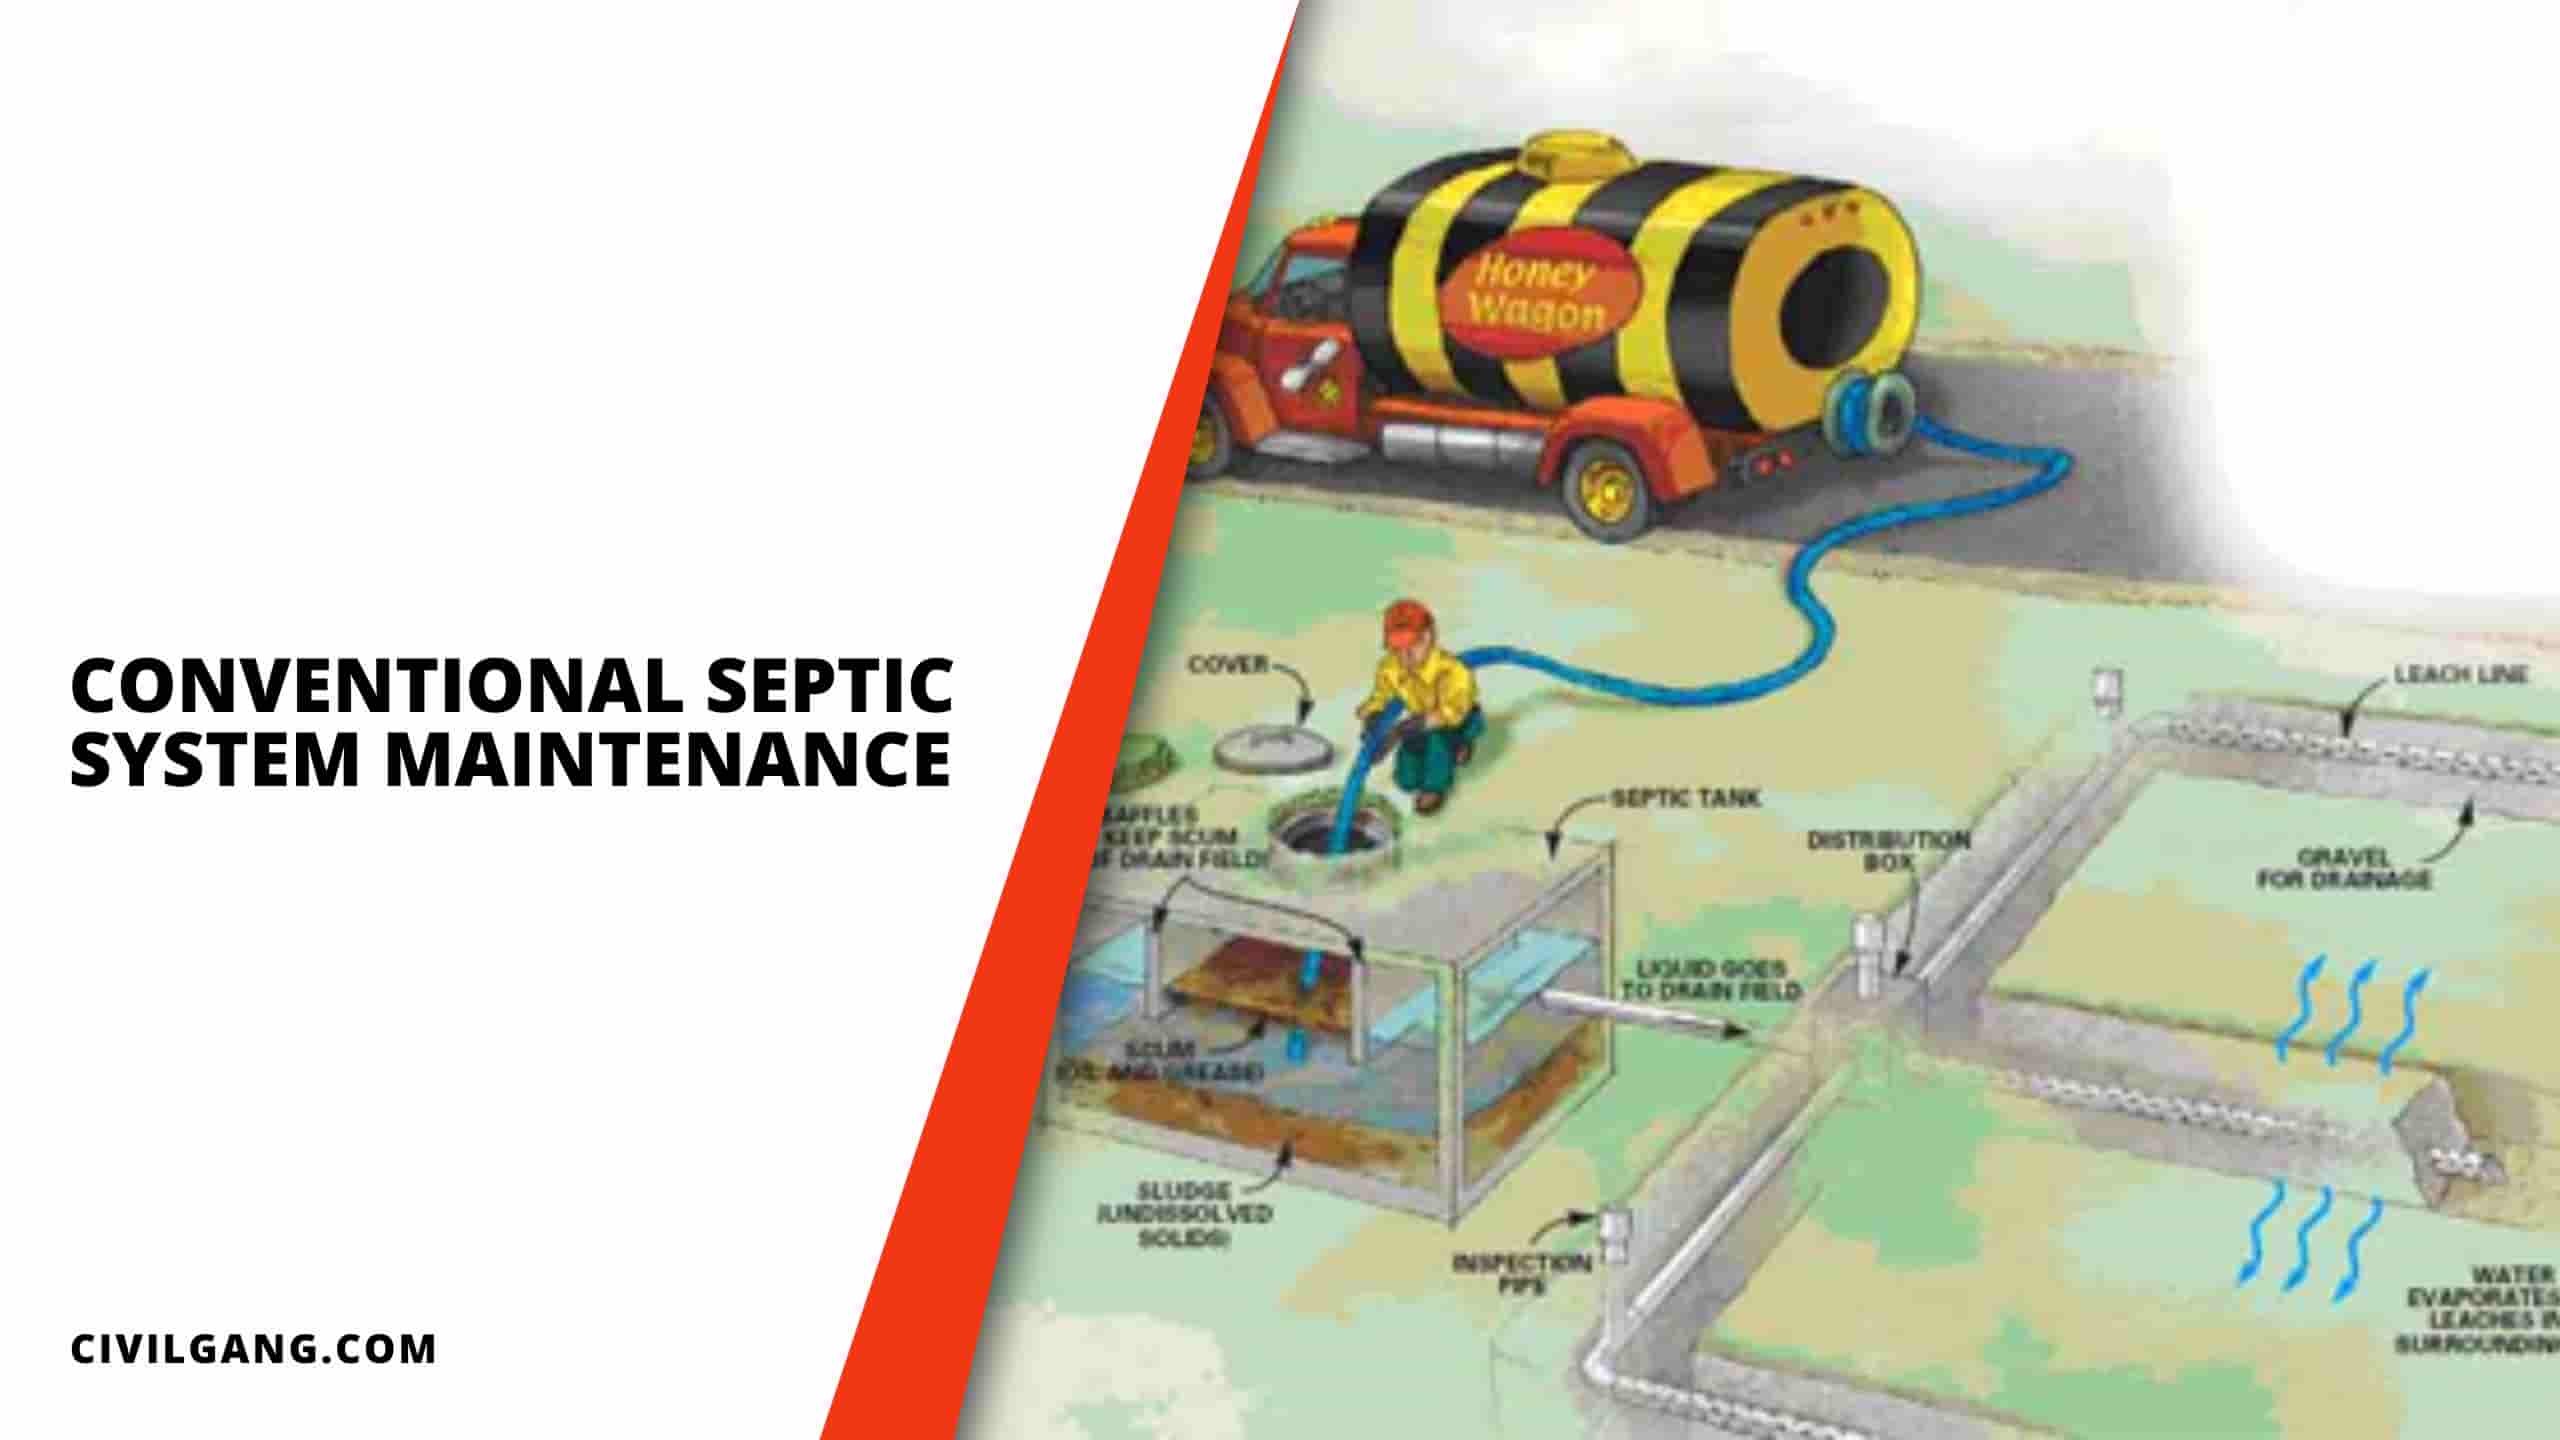 Conventional Septic System Maintenance